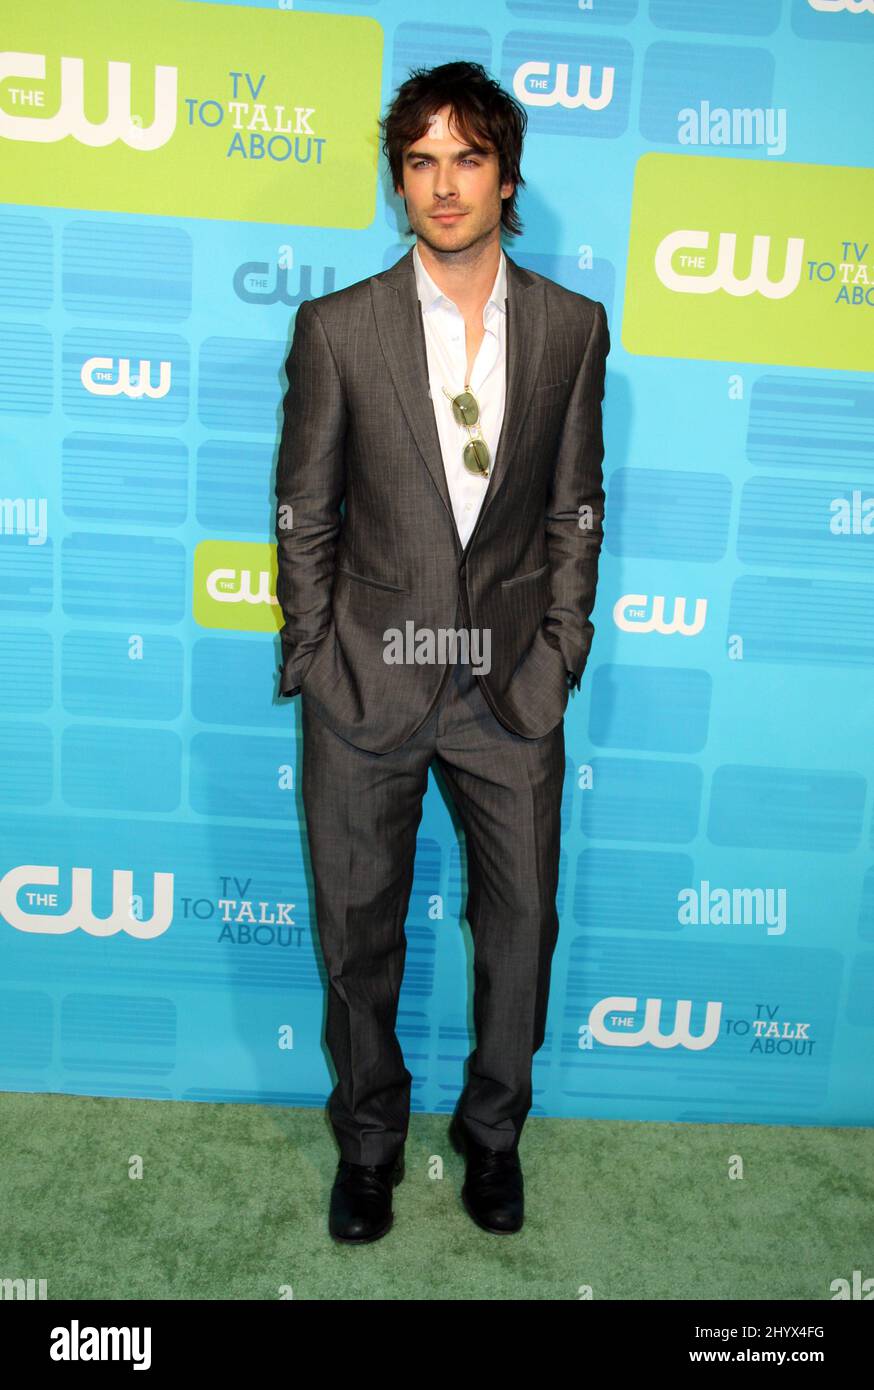 Ian Somerhalder at the CW Upfront Green Carpet Arrivals at Madison Square Garden in New York. Stock Photo